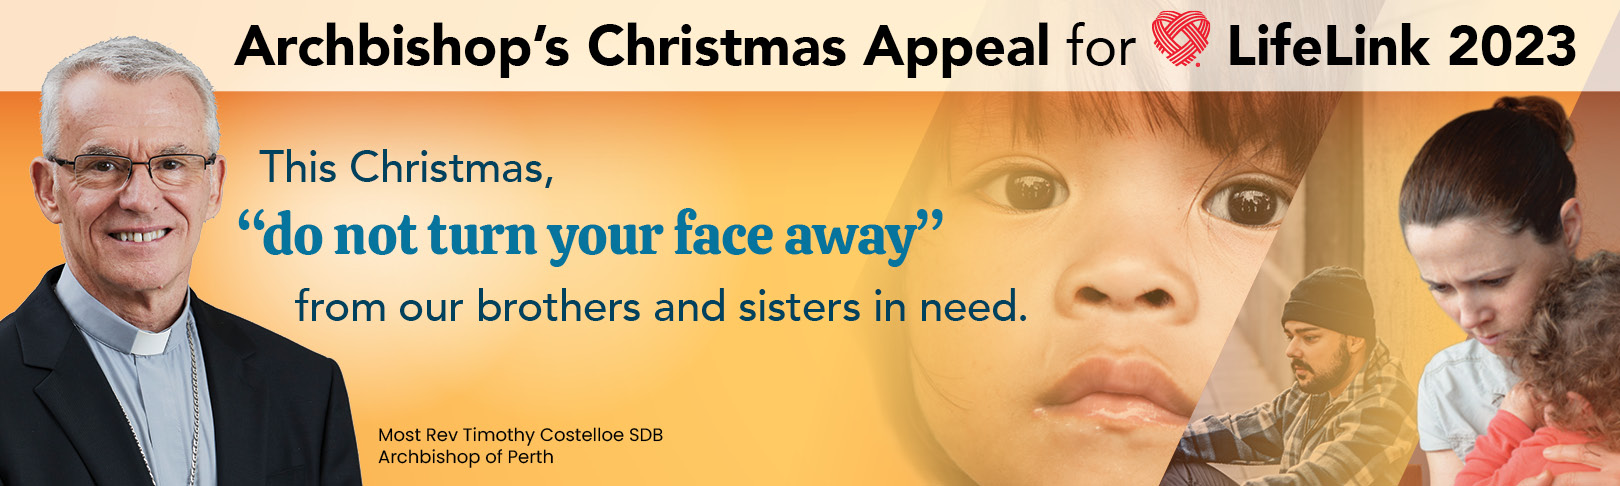 Archbishop's Christmas Appeal 2023